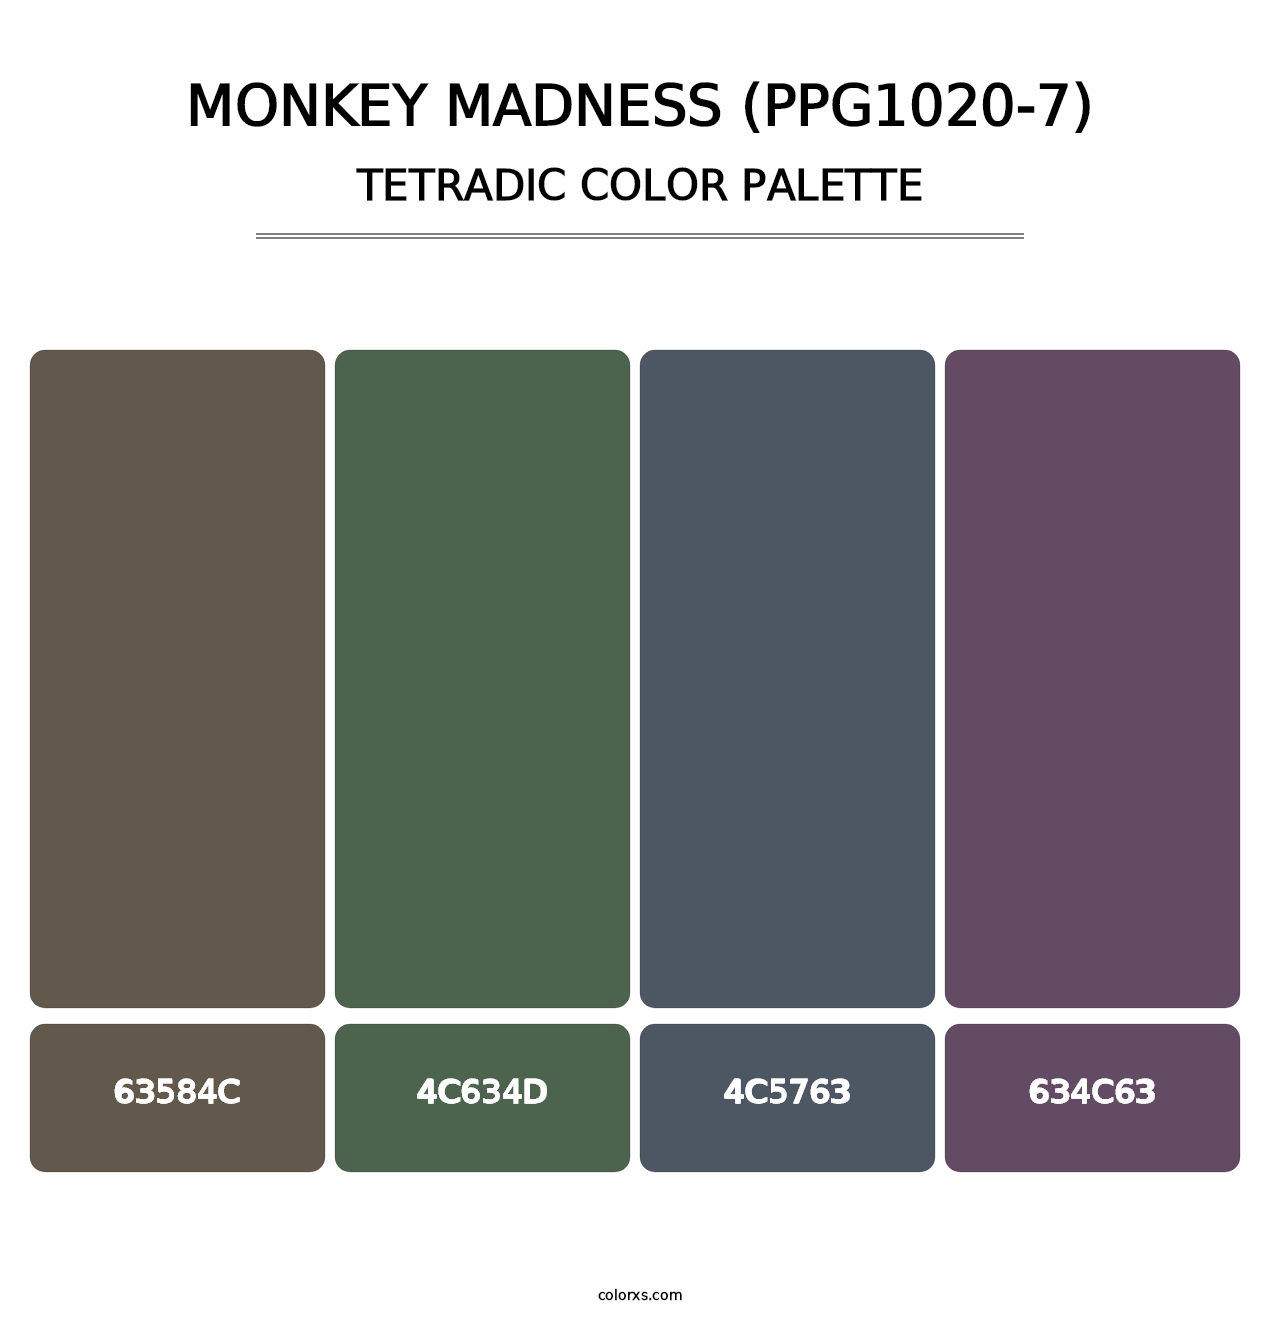 Monkey Madness (PPG1020-7) - Tetradic Color Palette